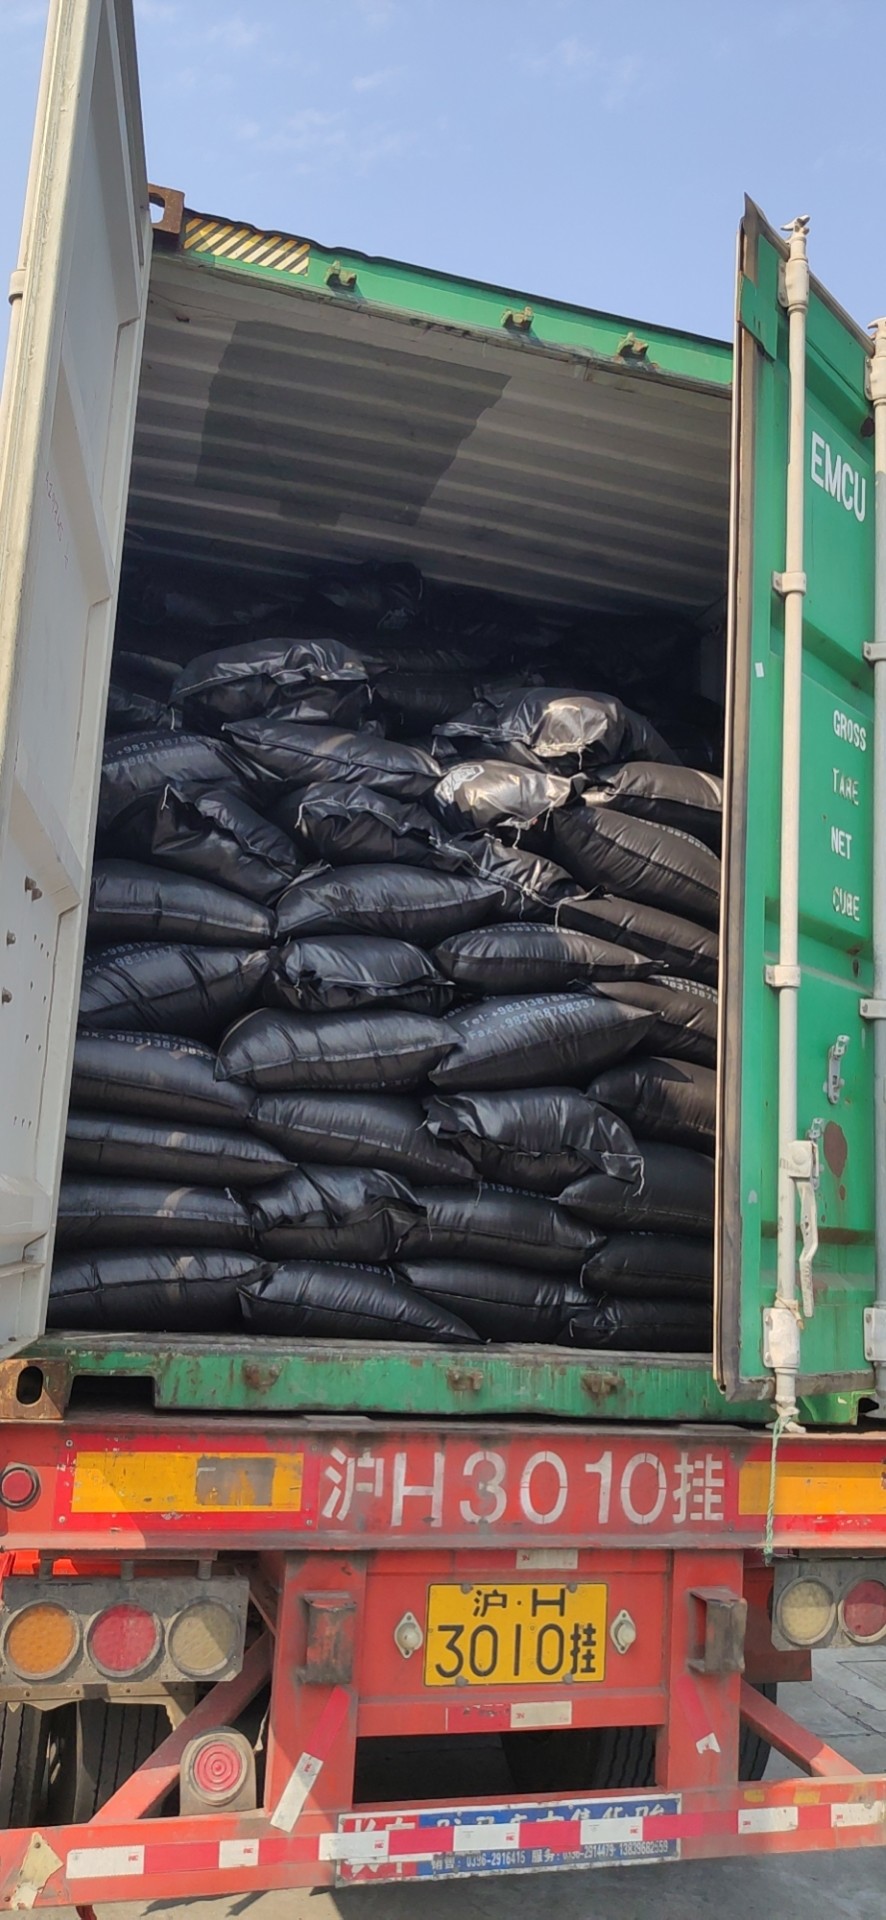 Food Industry Activated Carbon Charcoal Powder CAS 7440-44-0